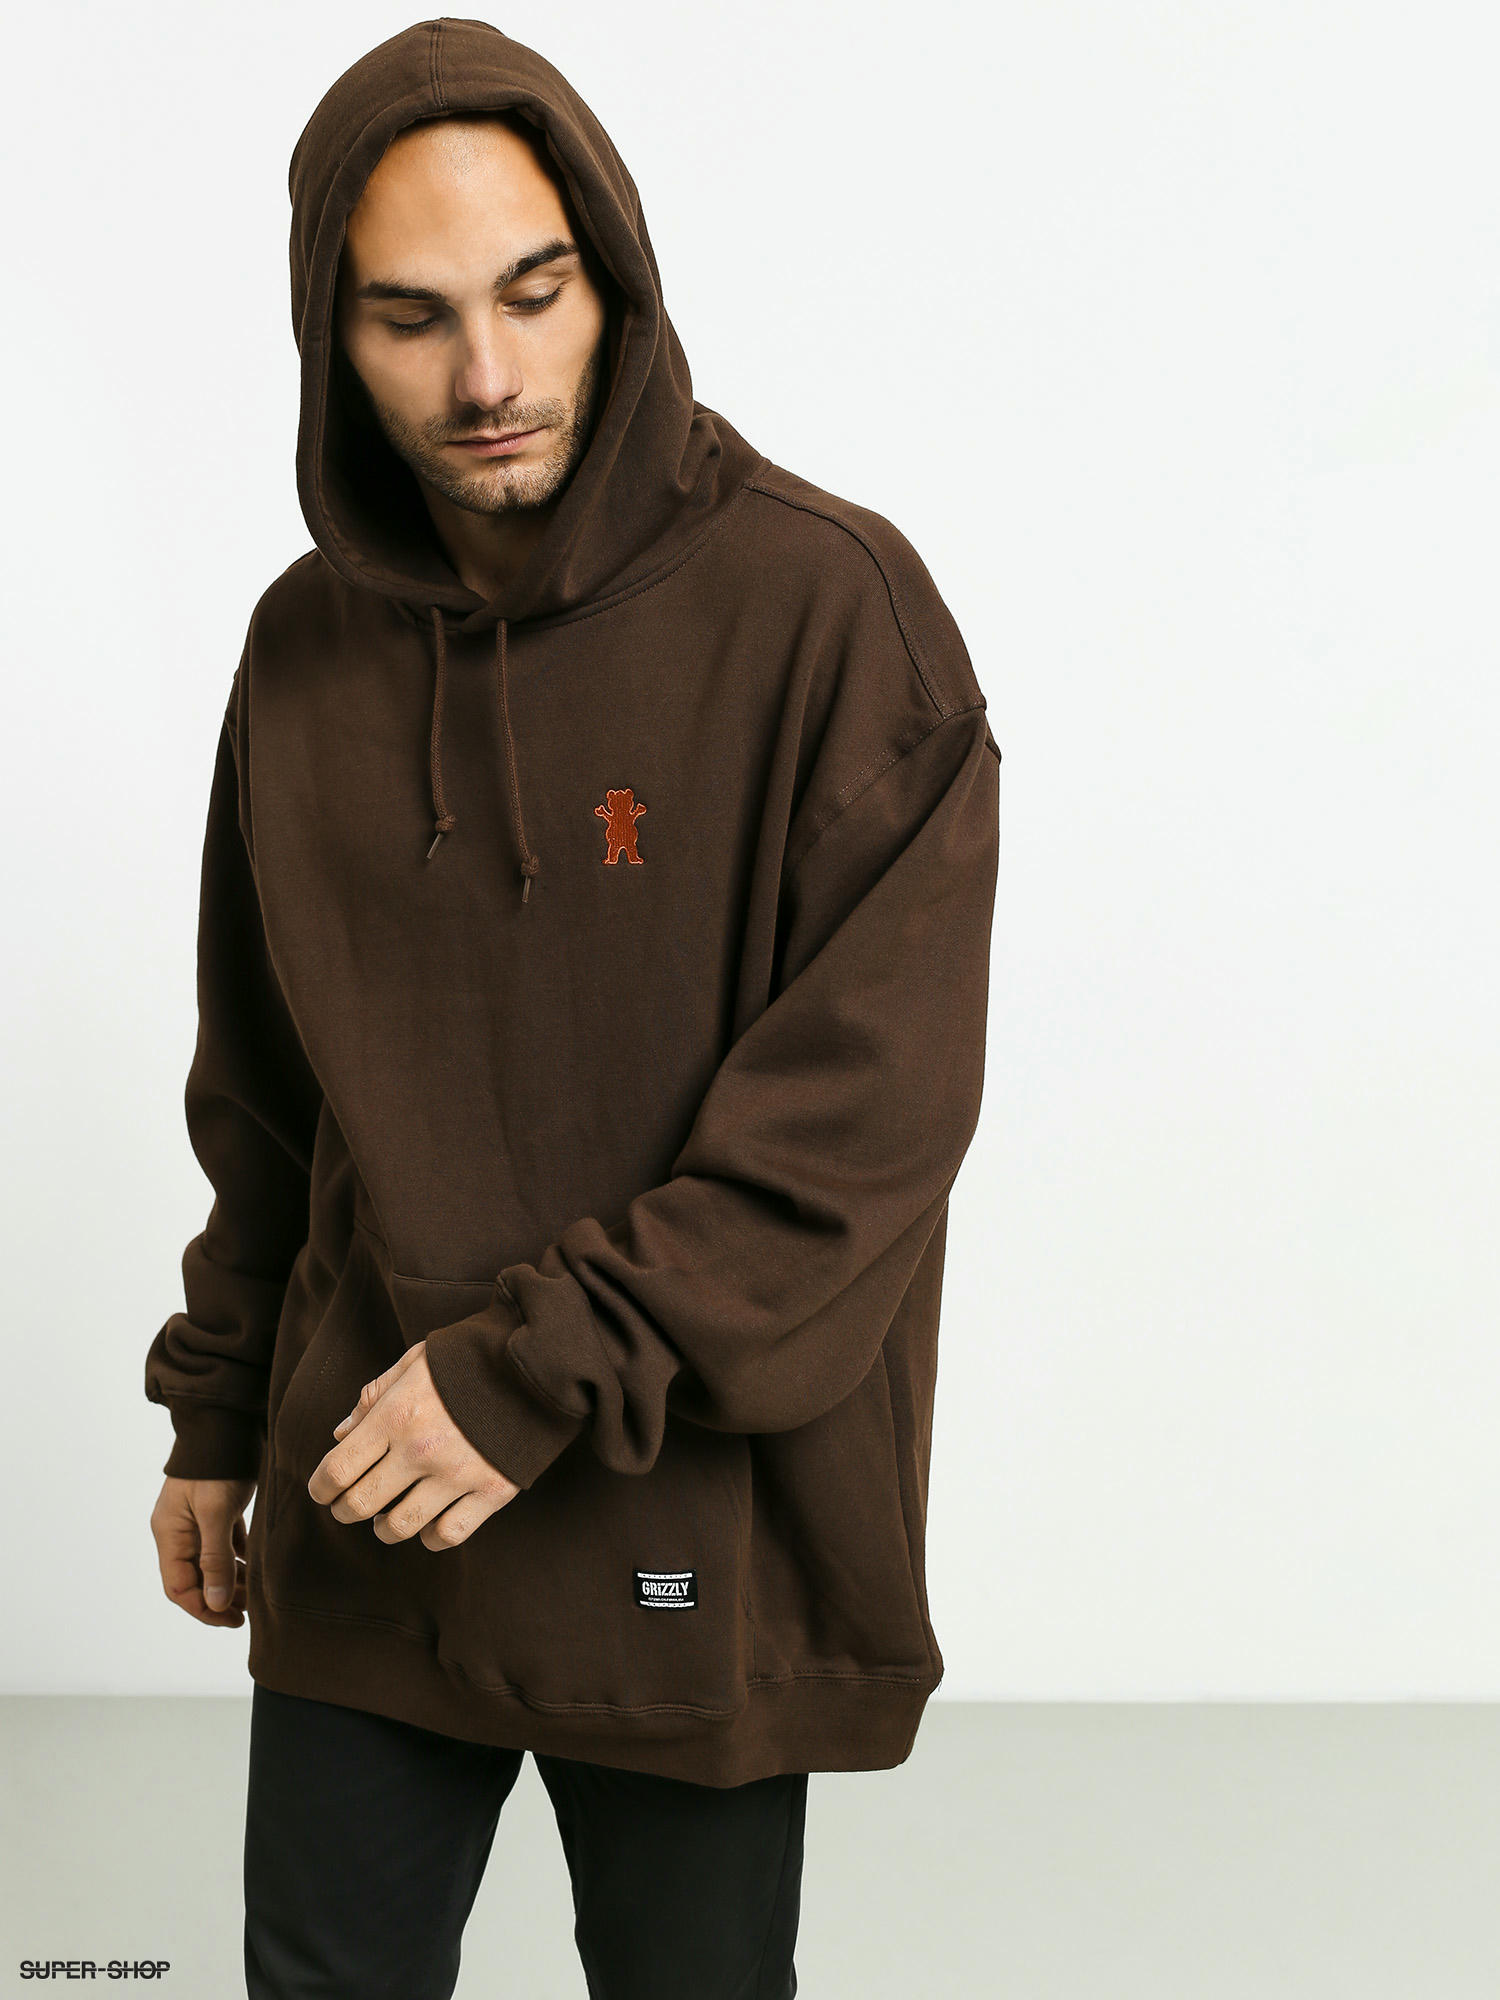 grizzly og bear embroidered hoodie